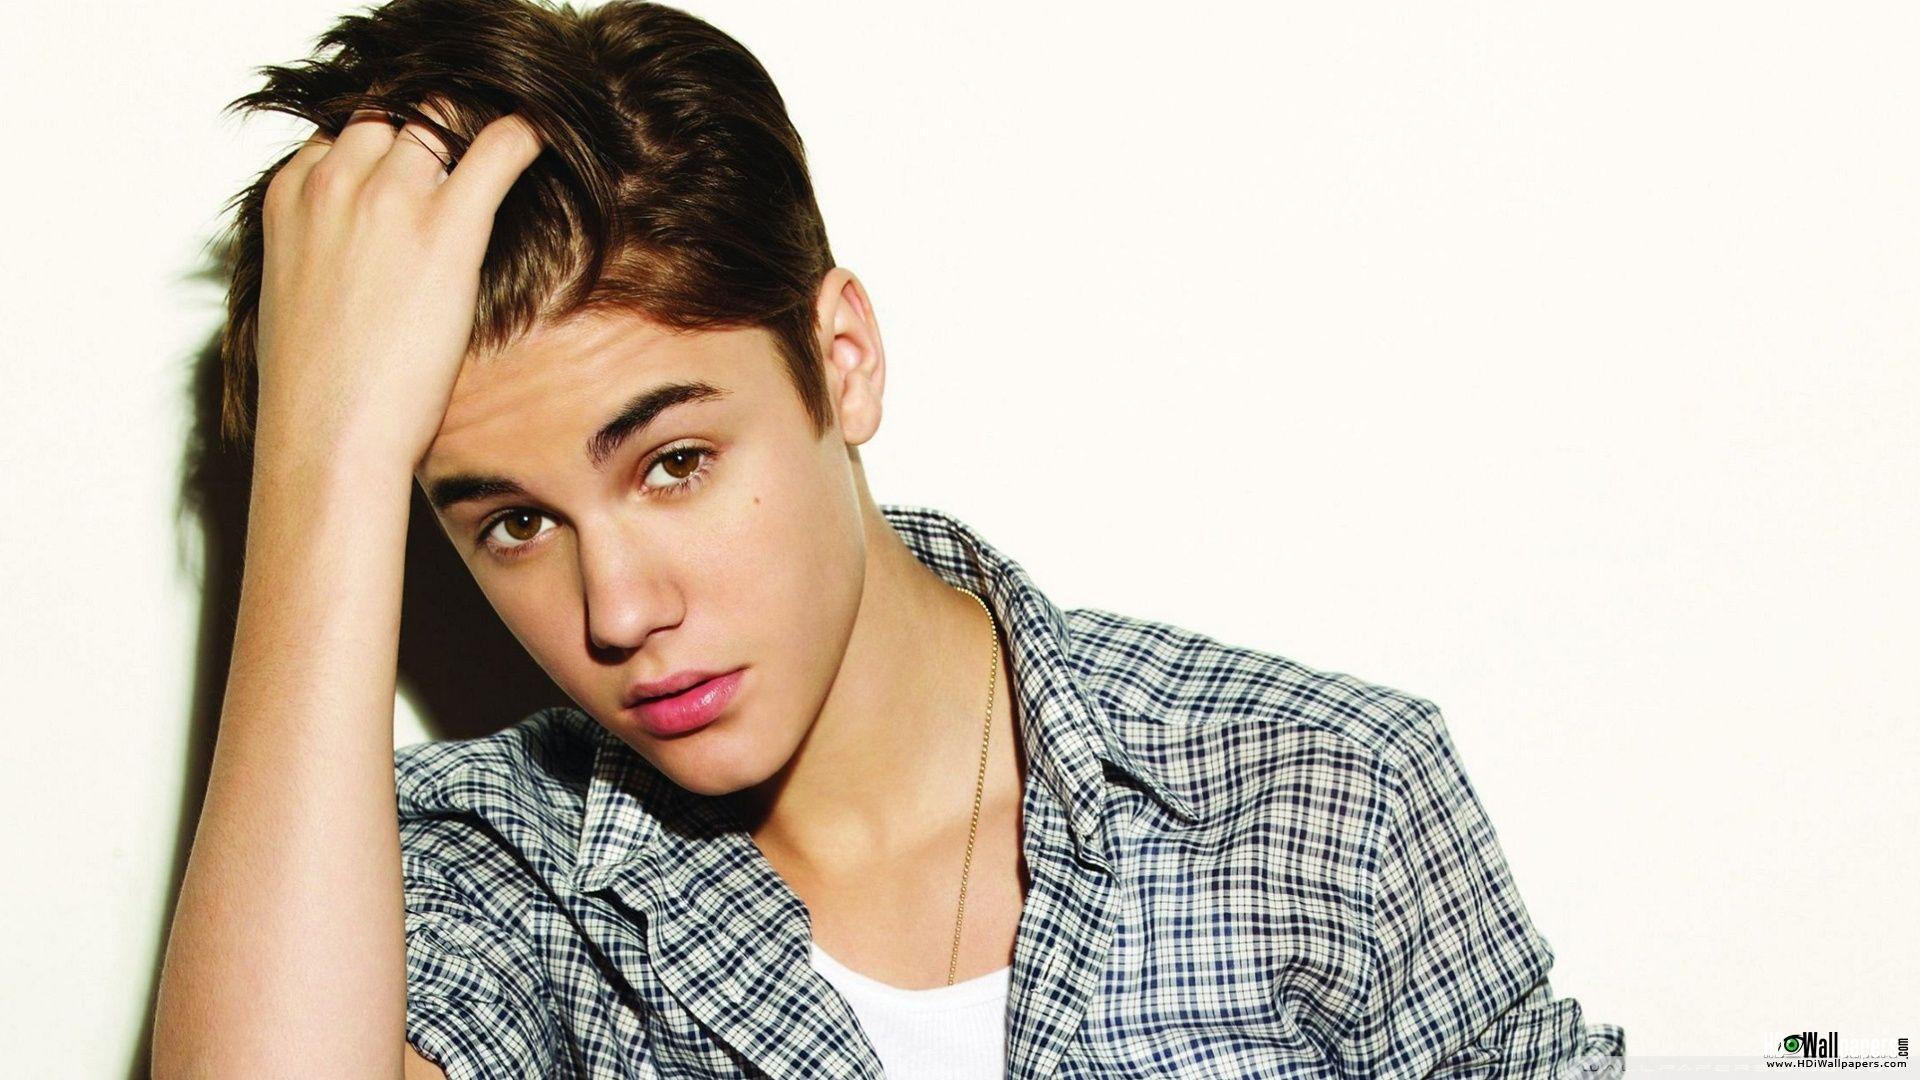 Awesome Justin Bieber Free Download wallpaper. celebrities